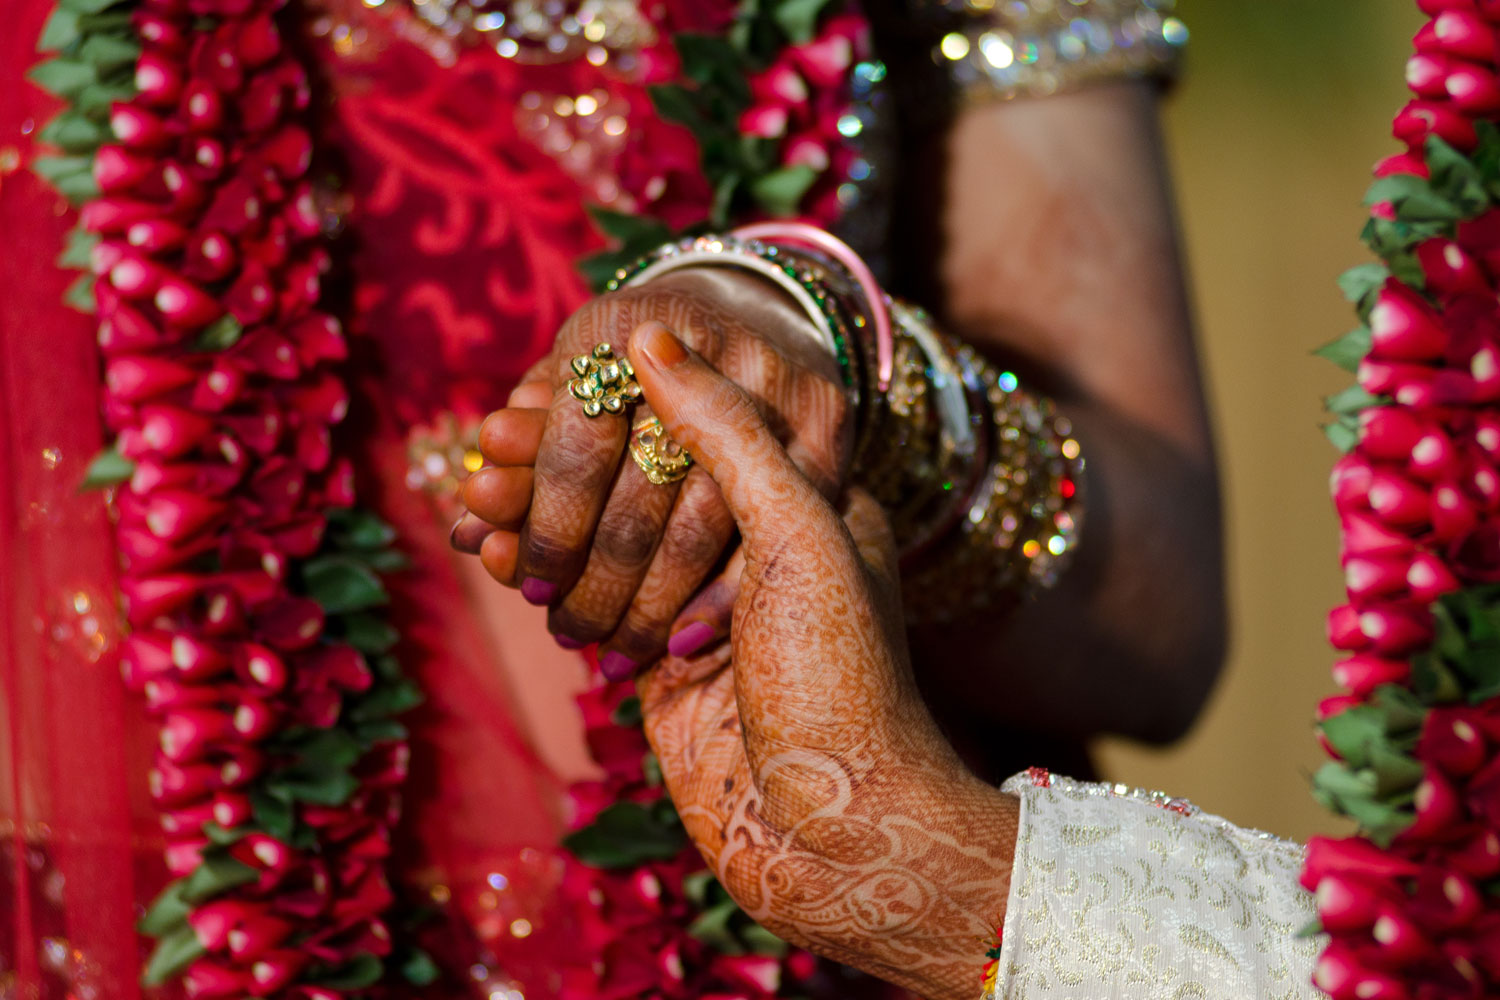 Voters in the constituency of Tonk-Sawai Madhopur in India's Rajasthan state can get a free wedding by voting for a local independent candidate (Getty Images)